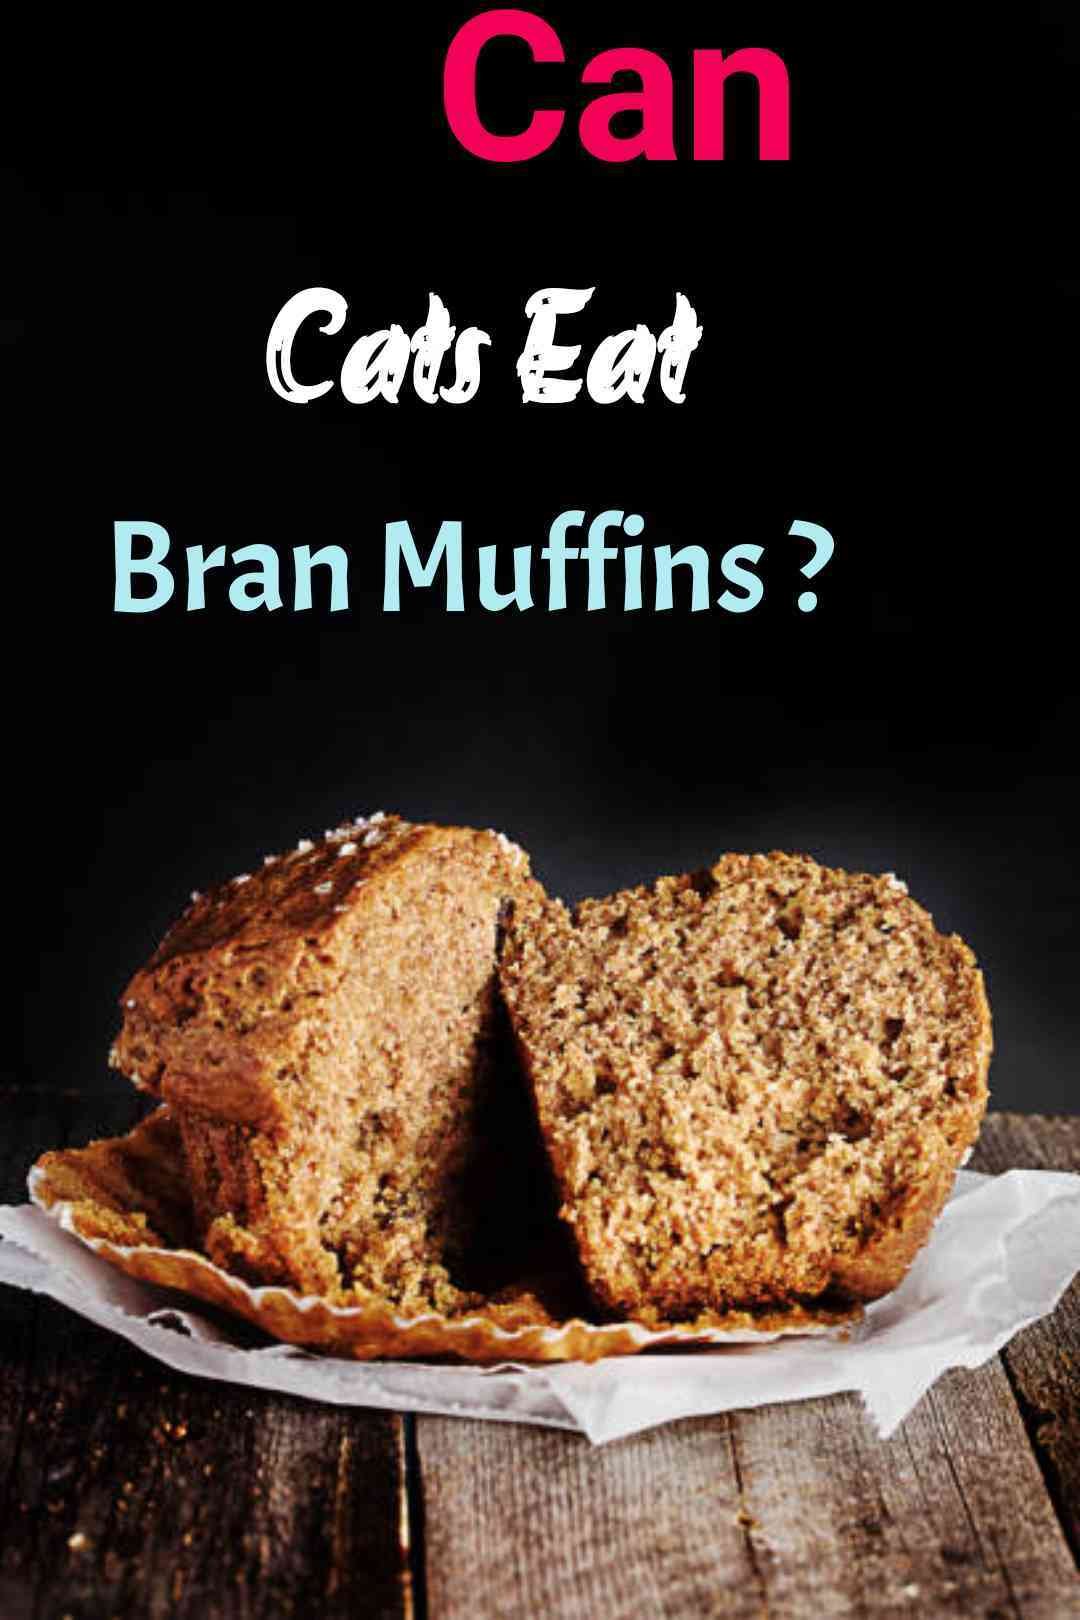 Can Cats Eat Bran Muffins?